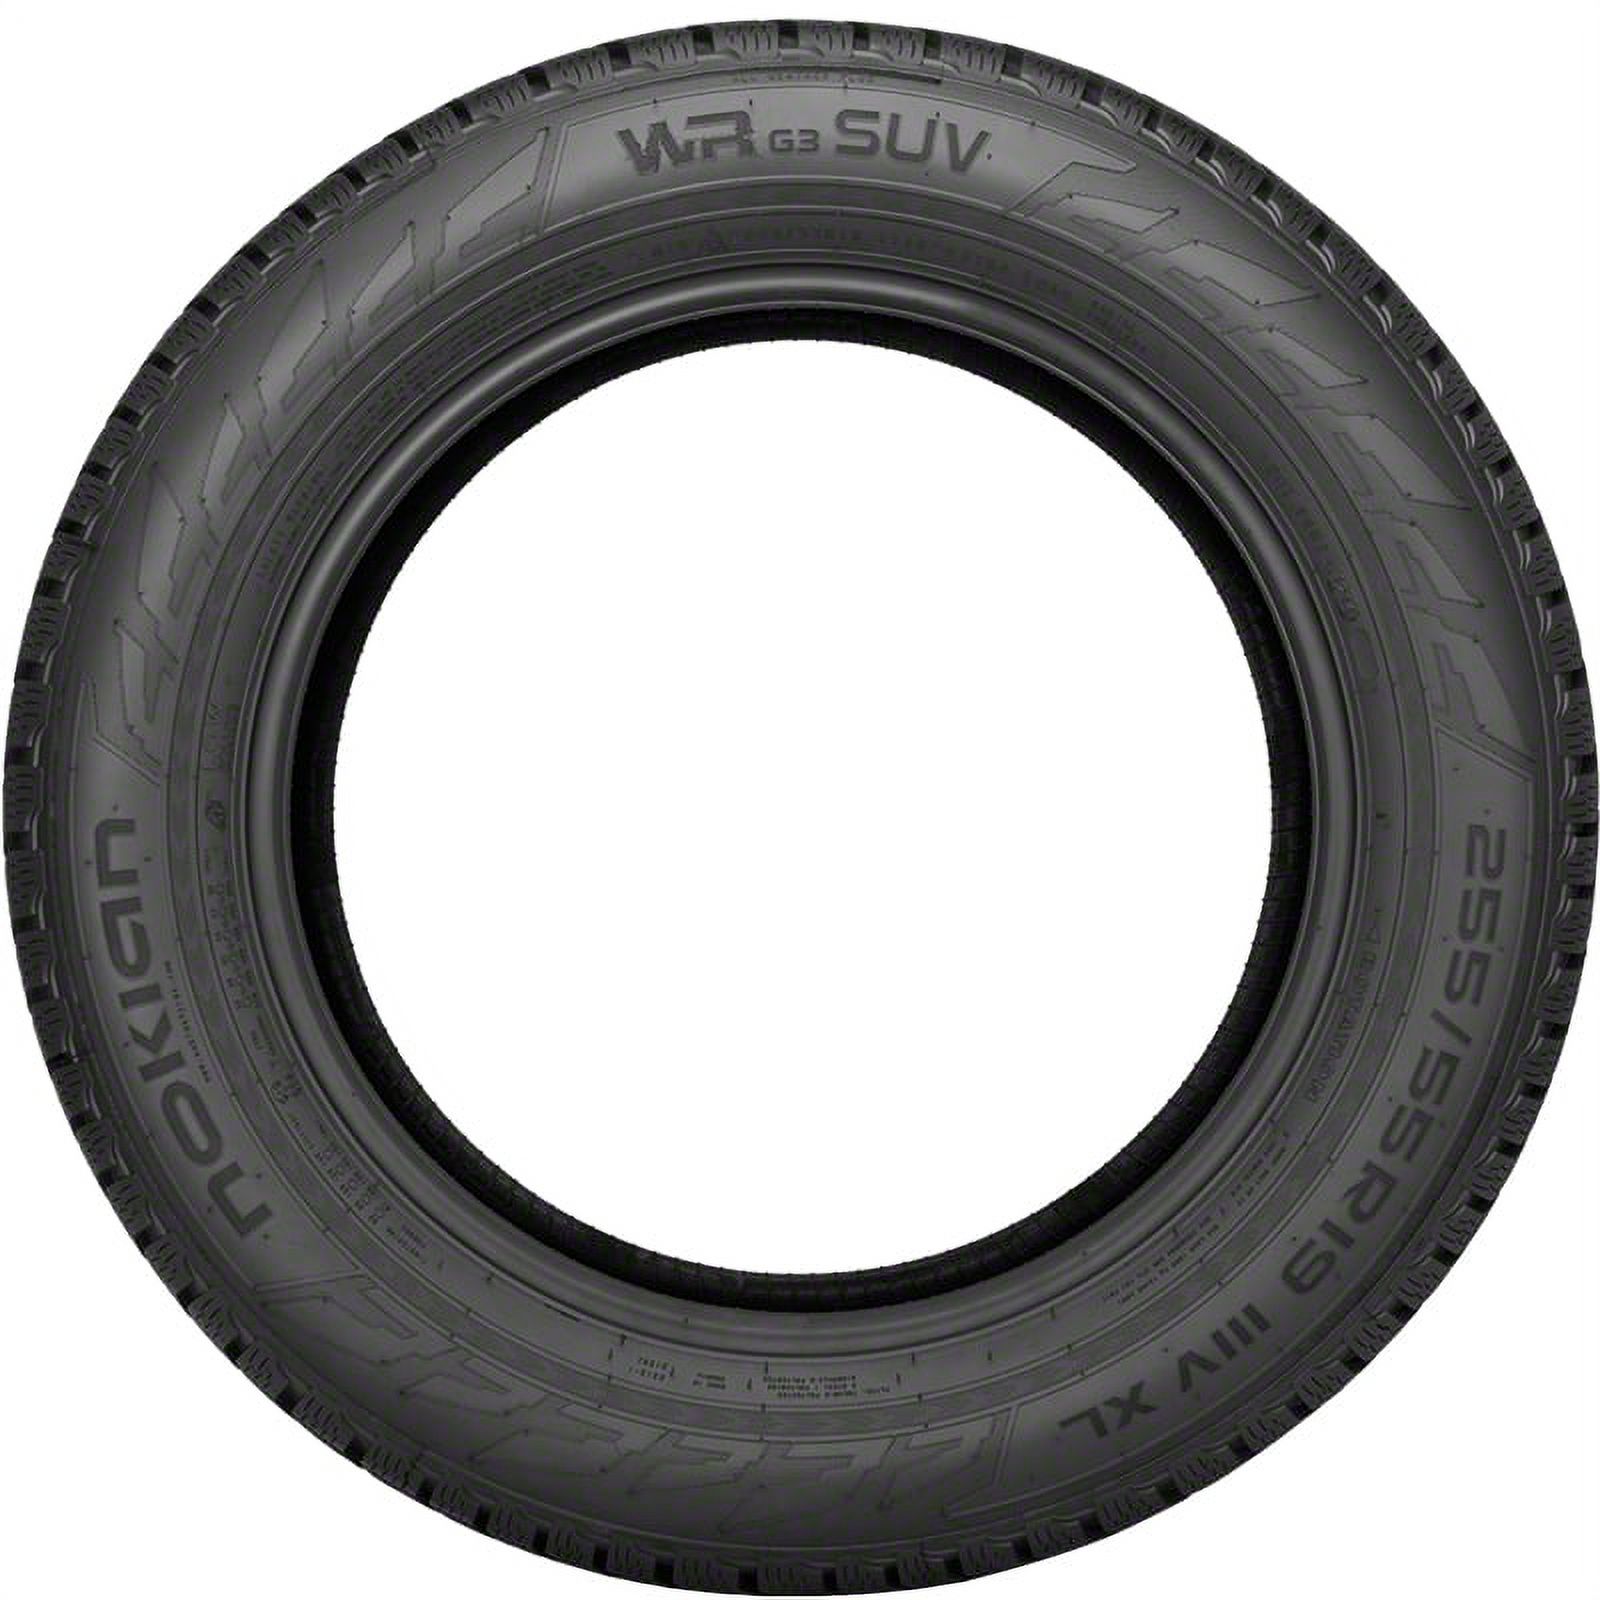 Nokian WRG3 SUV 245/55R19 103 H Tire - image 2 of 4